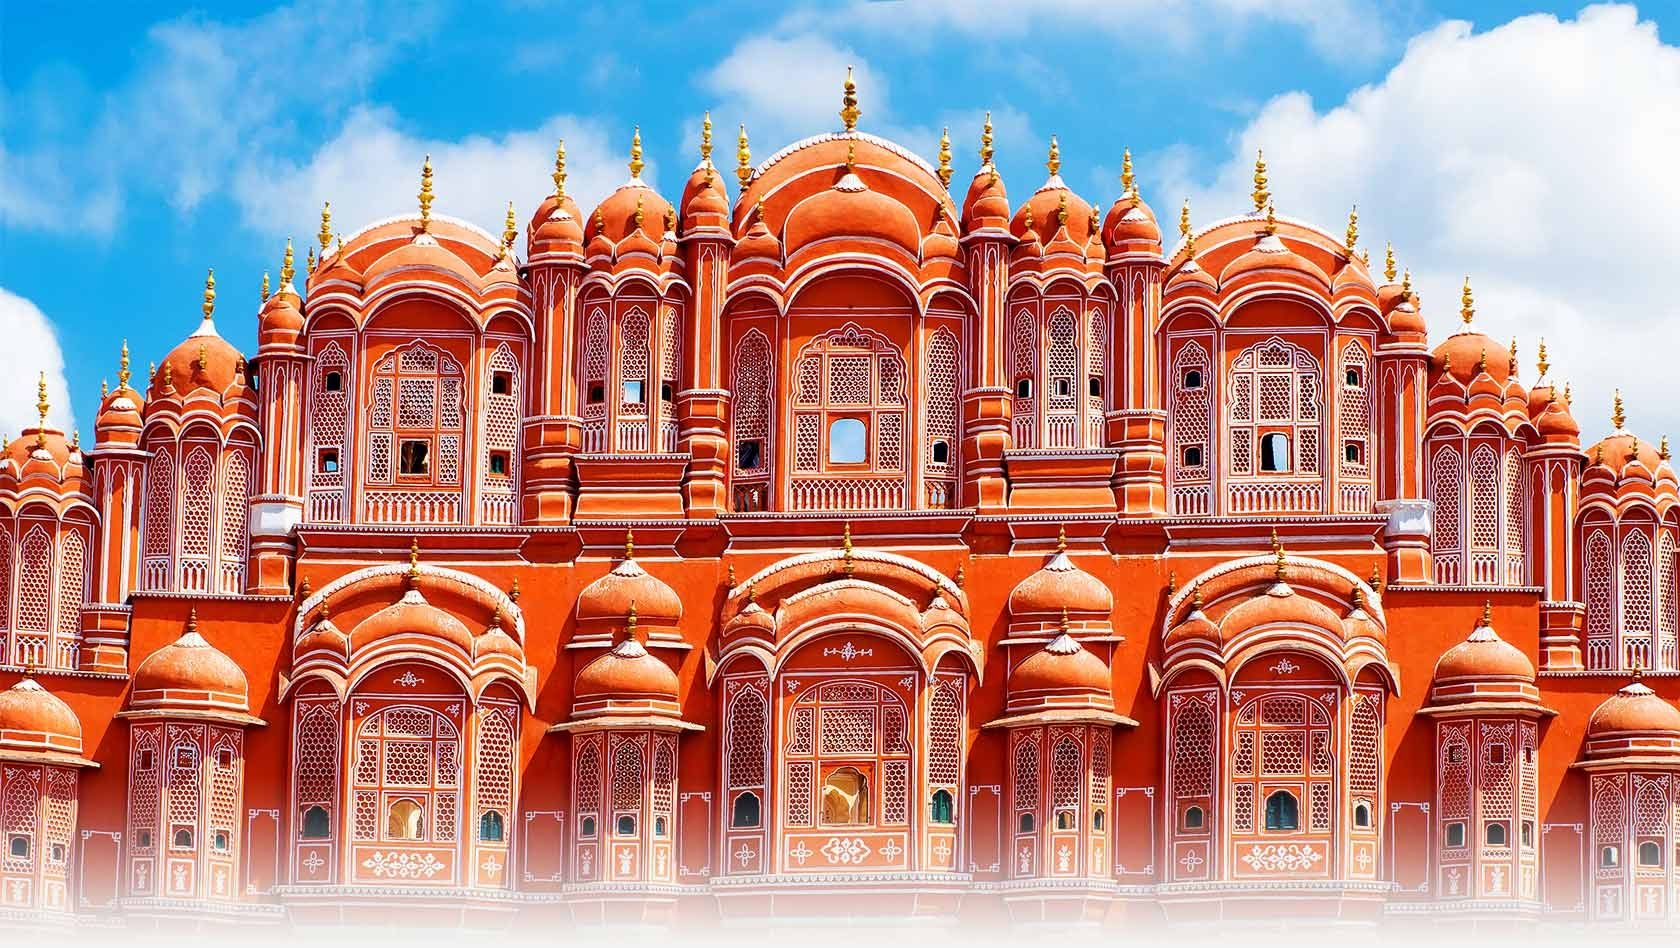 One Day Golden Triangle Tour of Agra and Jaipur from Delhi